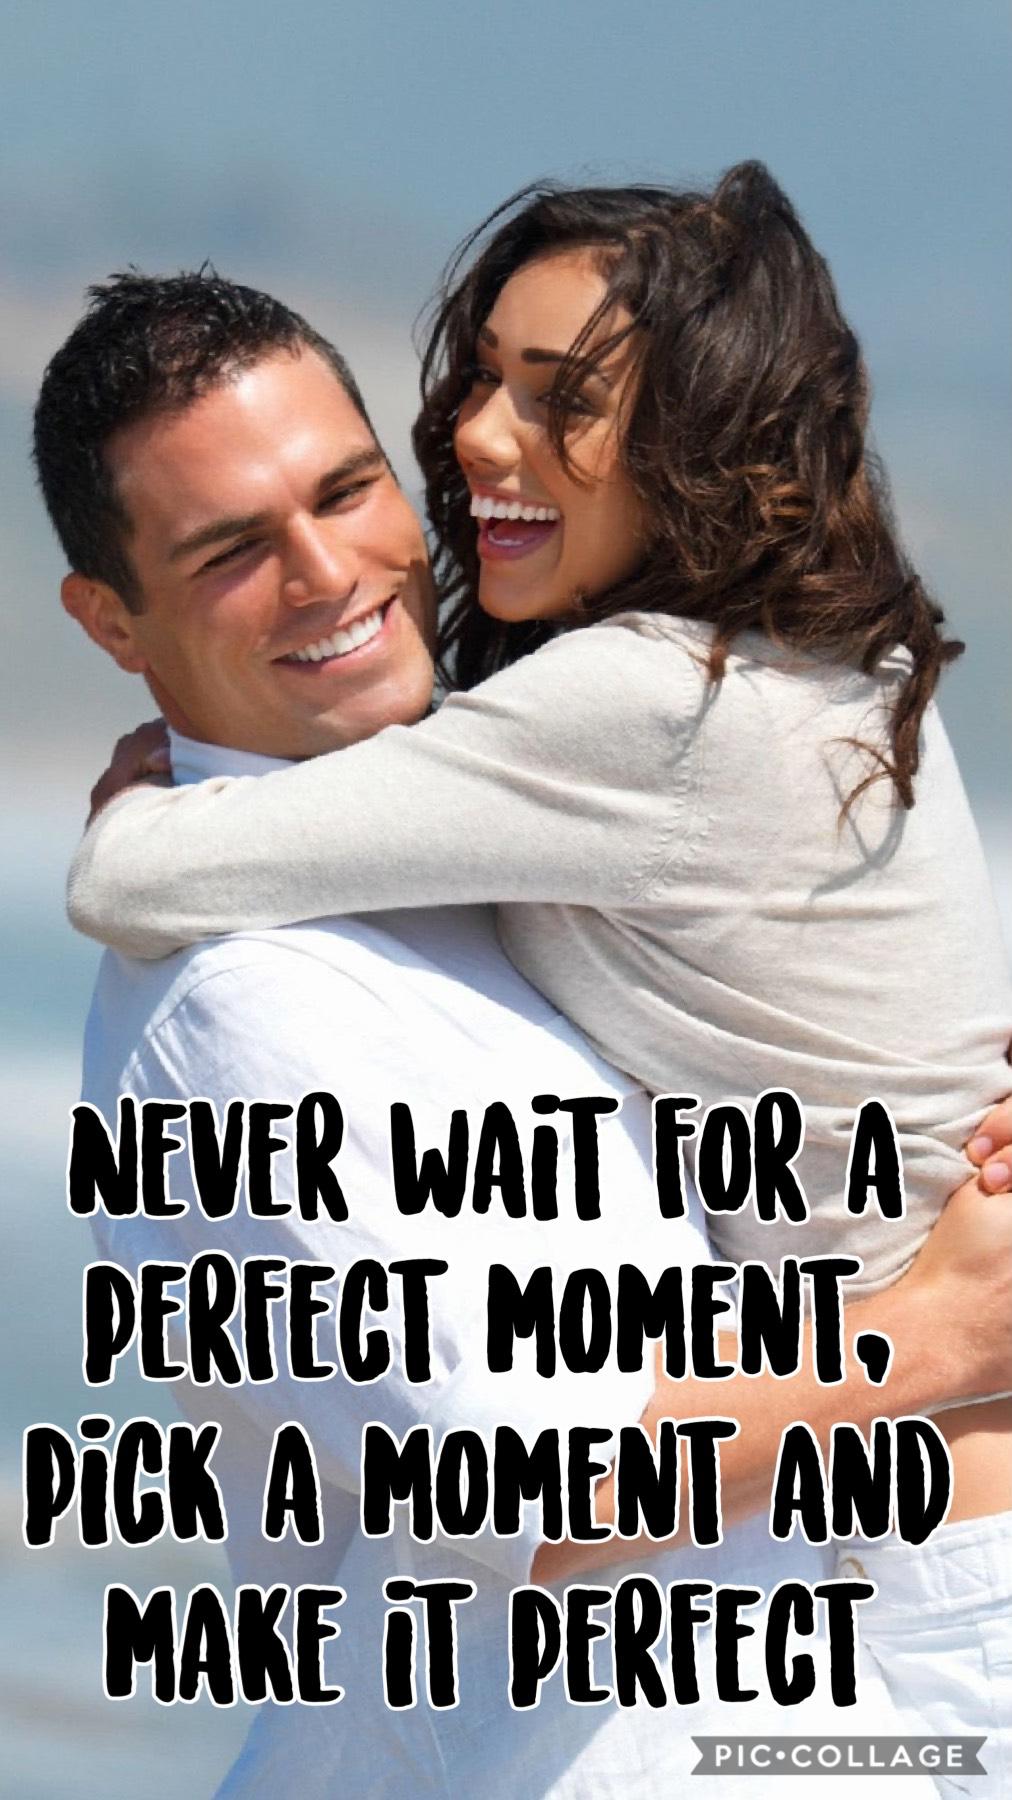 Never wait for a perfect moment pick a moment and make it perfect